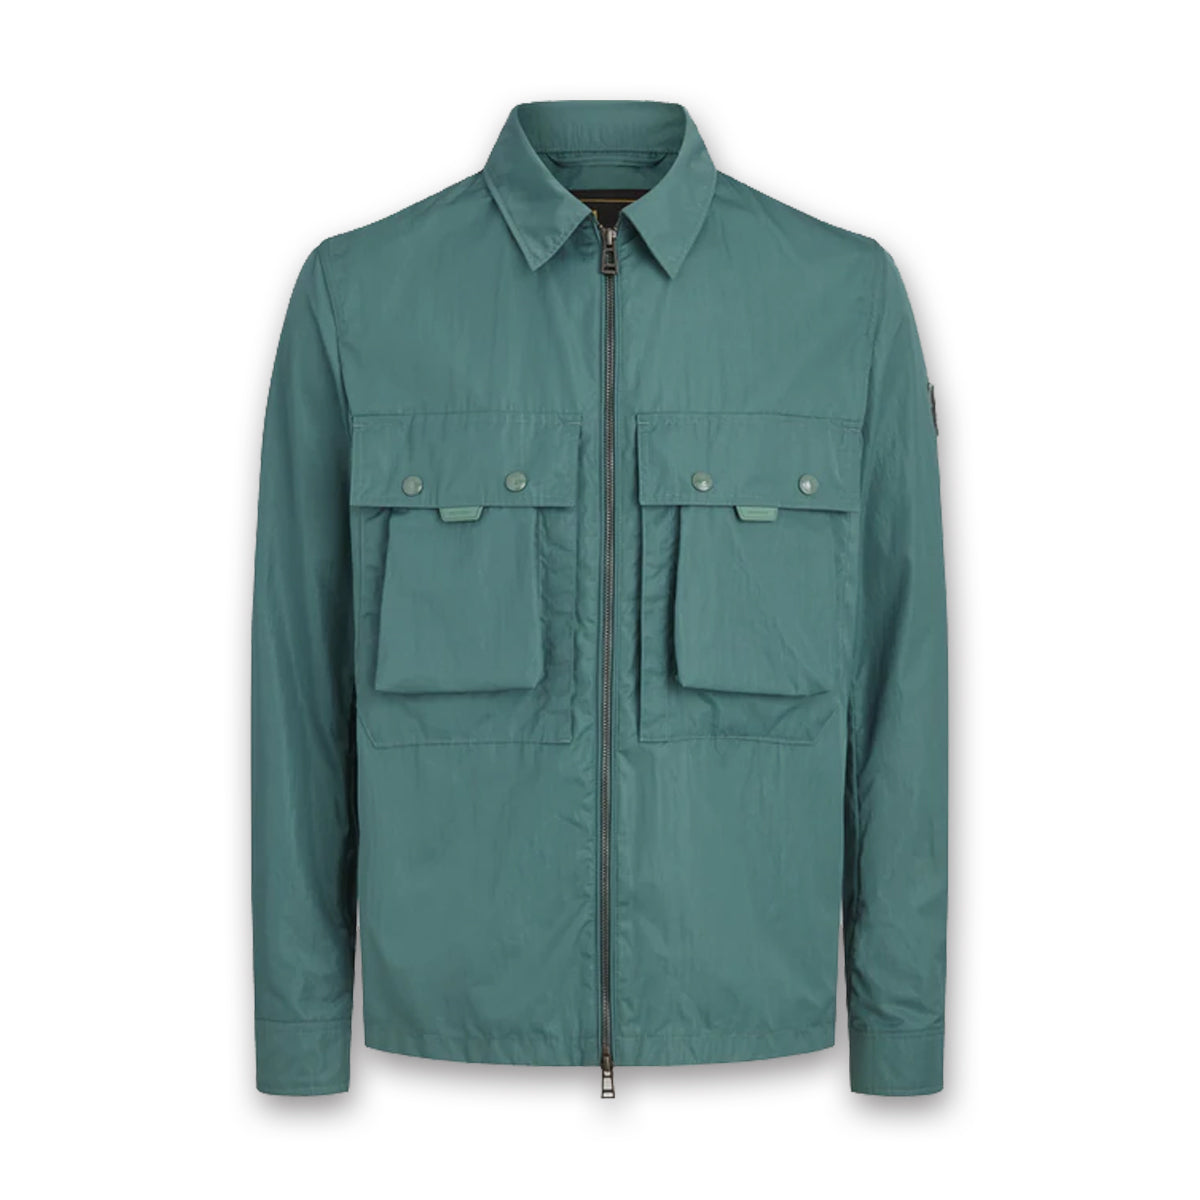 Belstaff - Tactical Overshirt in Faded Teal